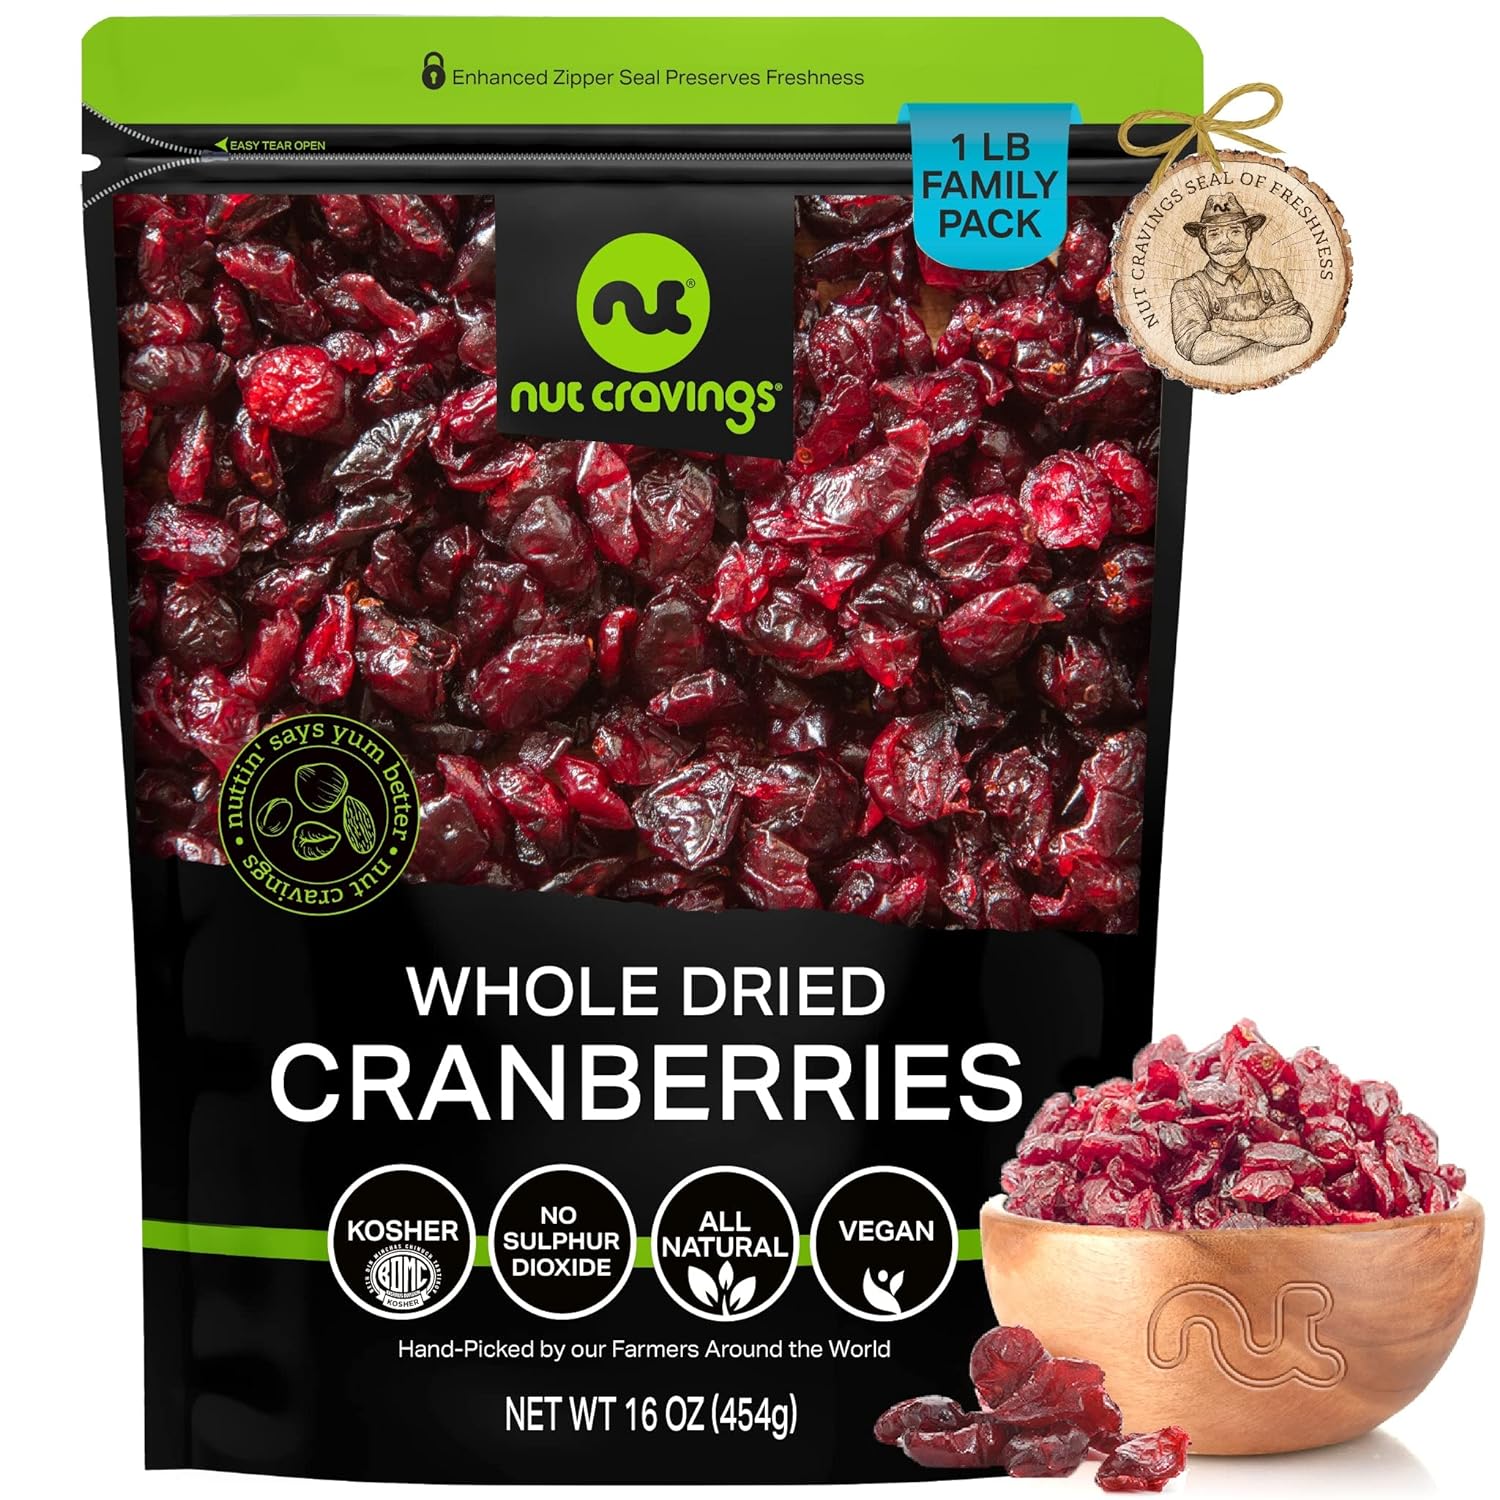 Nut Cravings Dry Fruits - Sun Dried Whole Cranberries, Lightly Sweetened (16oz - 1 LB) Packed Fresh in Resealable Bag - Sweet Snack, Healthy Food, All Natural, Vegan, Kosher Certified